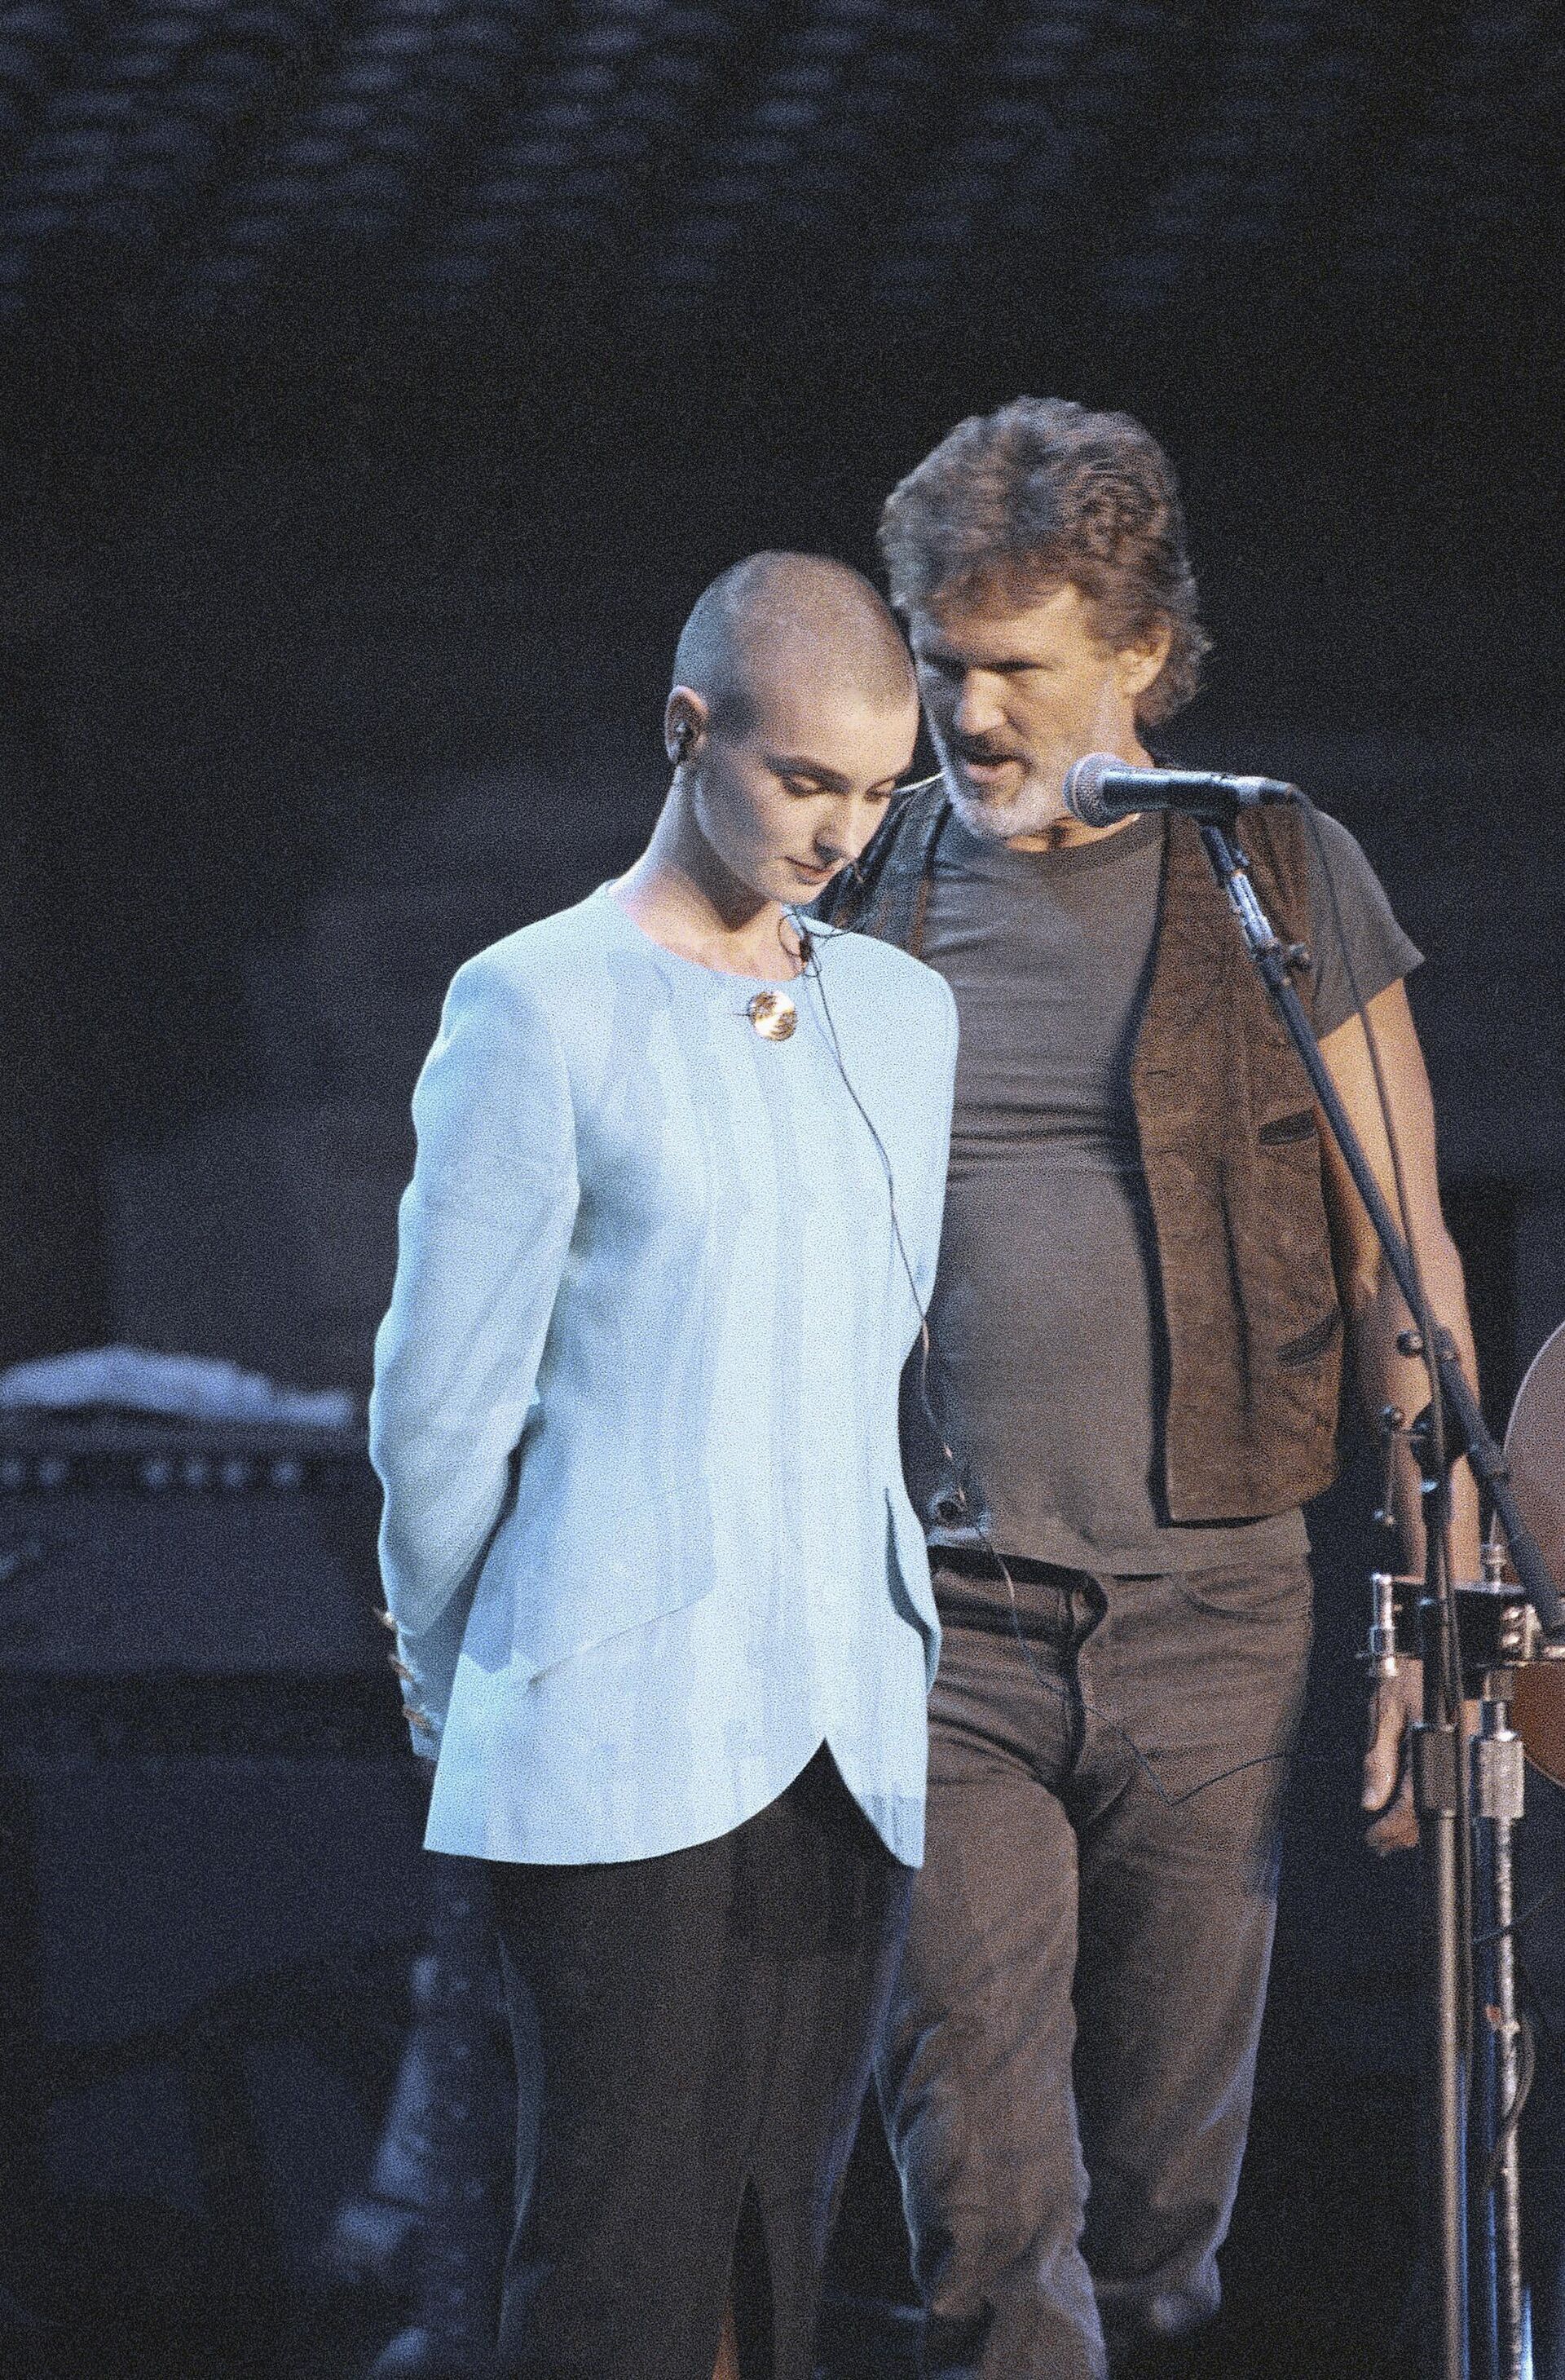 FILE - Kris Kristofferson comforts Sinead O'Connor after she was booed off stage during the Bob Dylan anniversary concert at New York Madison Square Garden, on Oct. 17, 1992. The performance was O'Connor's first live event since she ripped a picture of Pope John Paul II during a performance on Saturday Night Live. O’Connor, the gifted Irish singer-songwriter who became a superstar in her mid-20s but was known as much for her private struggles and provocative actions as for her fierce and expressive music, has died at 56. The singer's family issued a statement reported Wednesday by the BBC and RTE. - Sputnik International, 1920, 26.07.2023